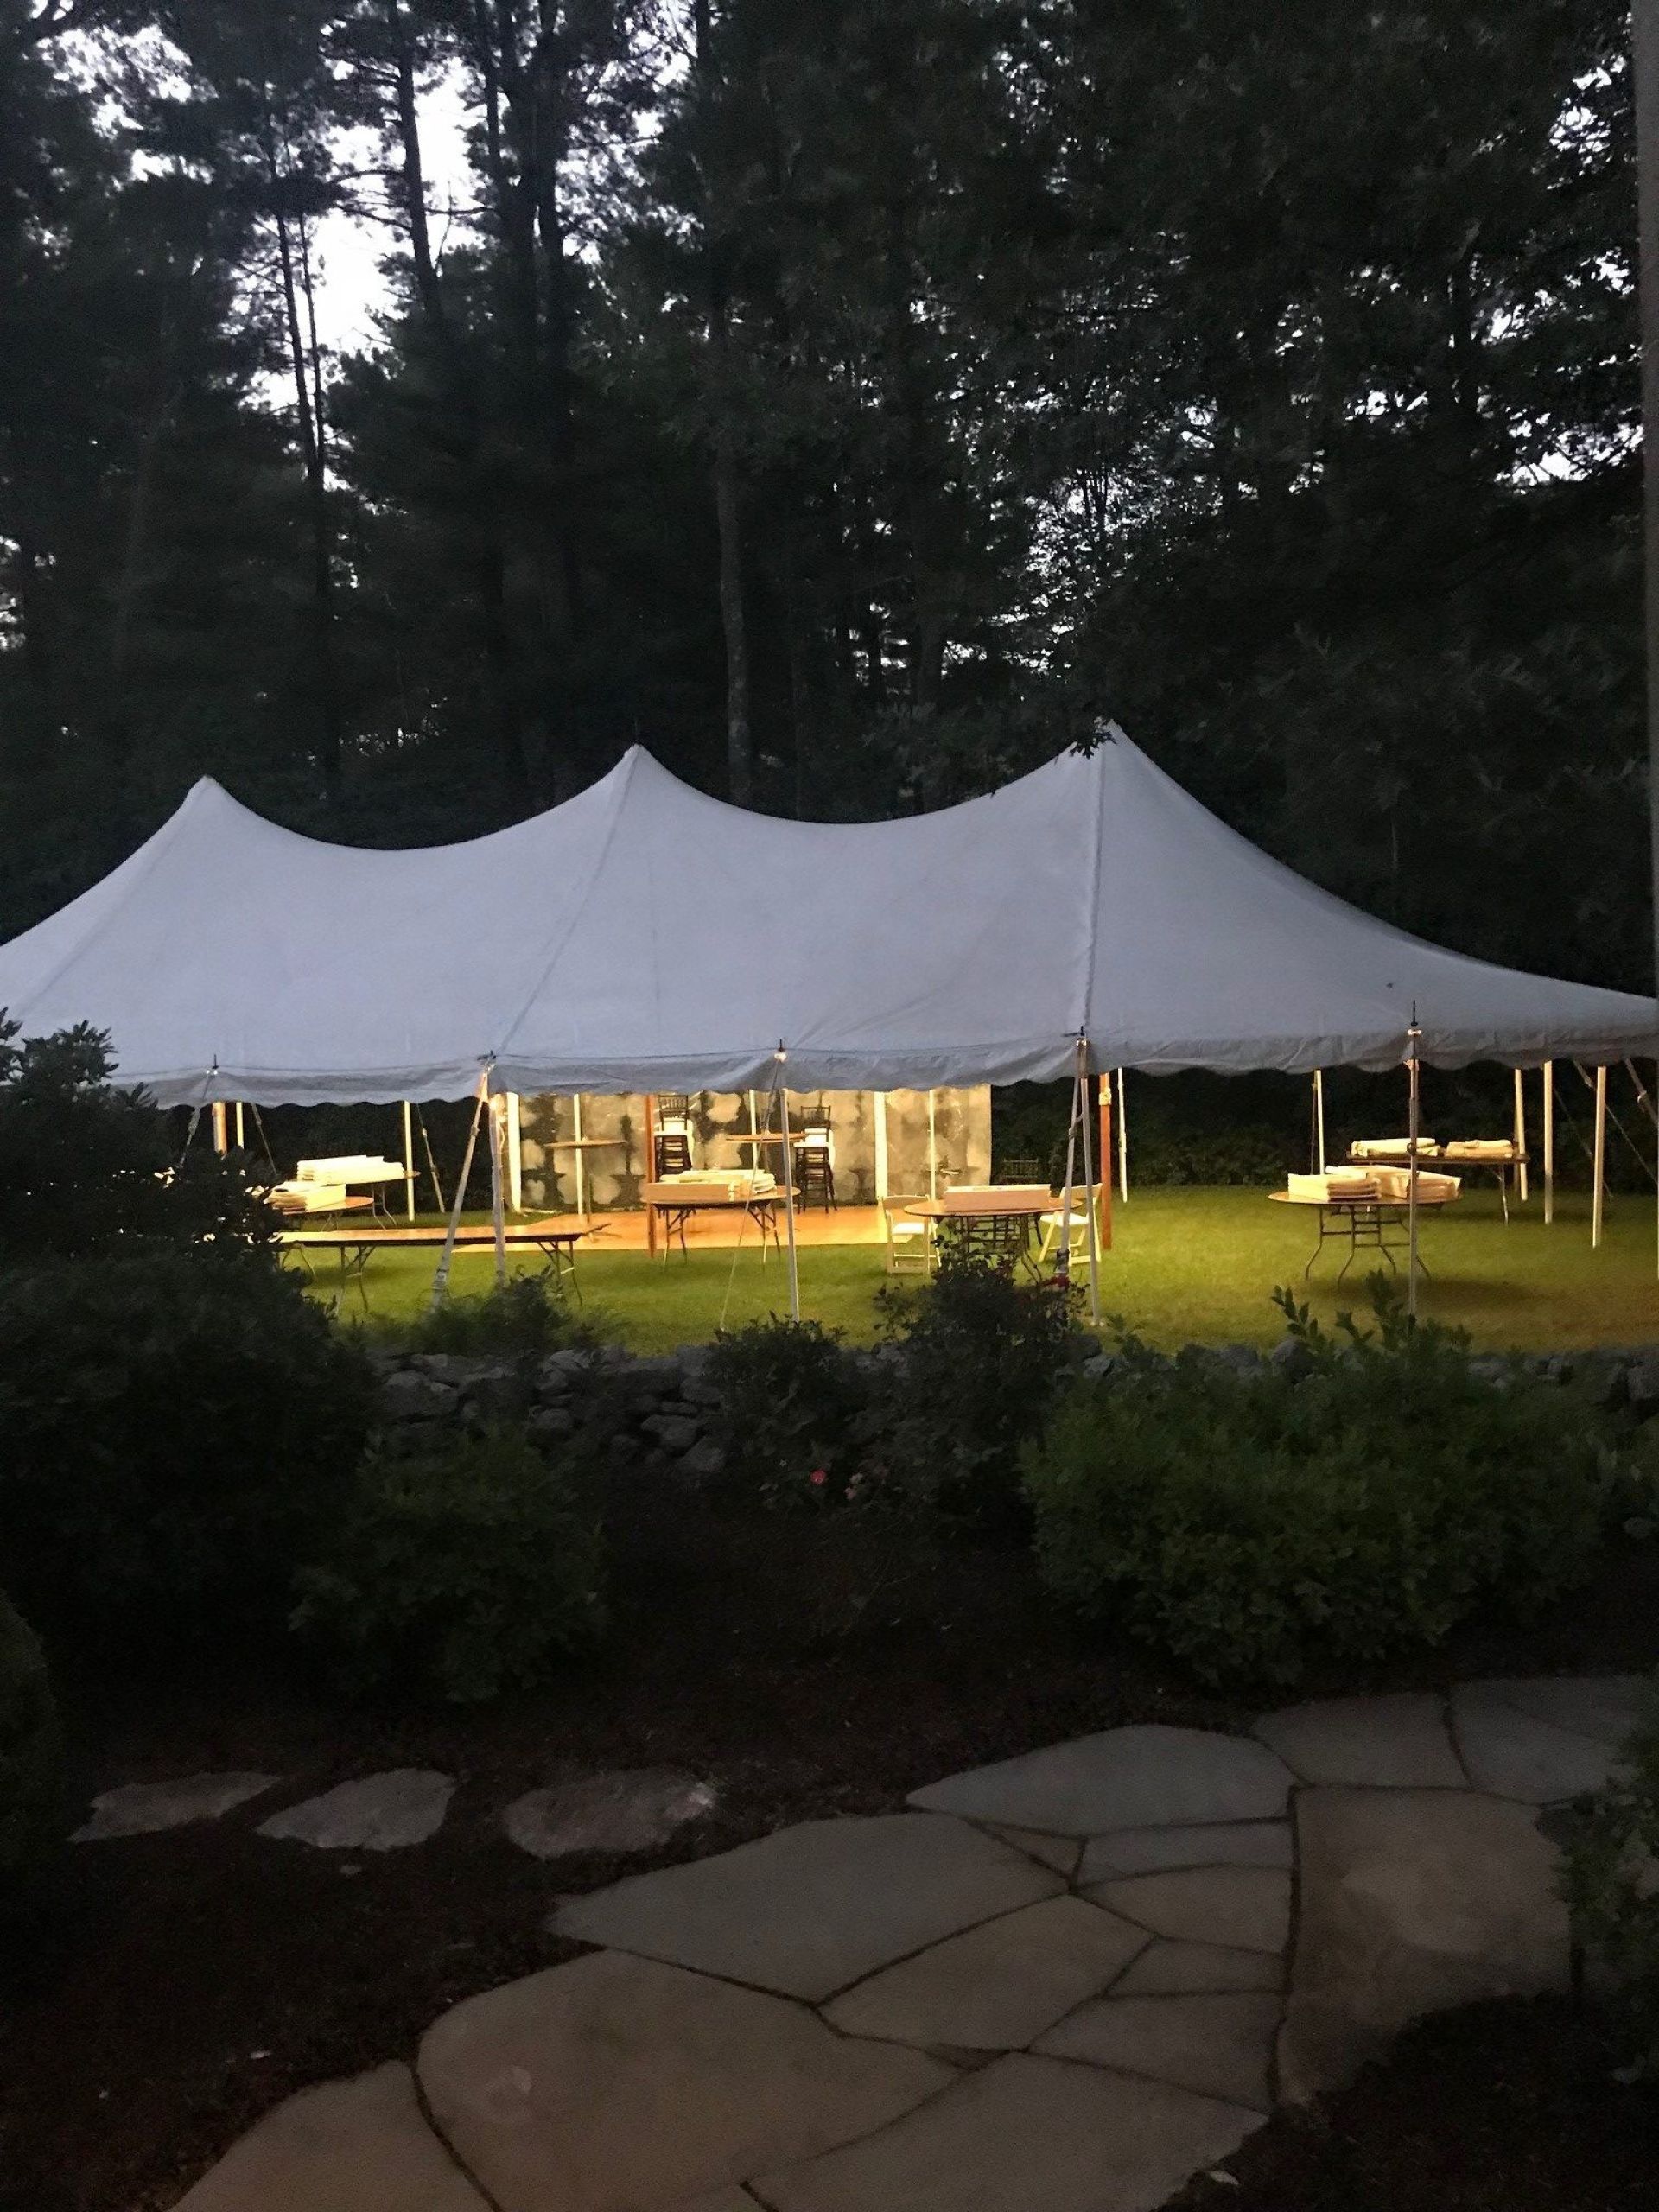 Photo of a wedding tent being setup on a lawn.